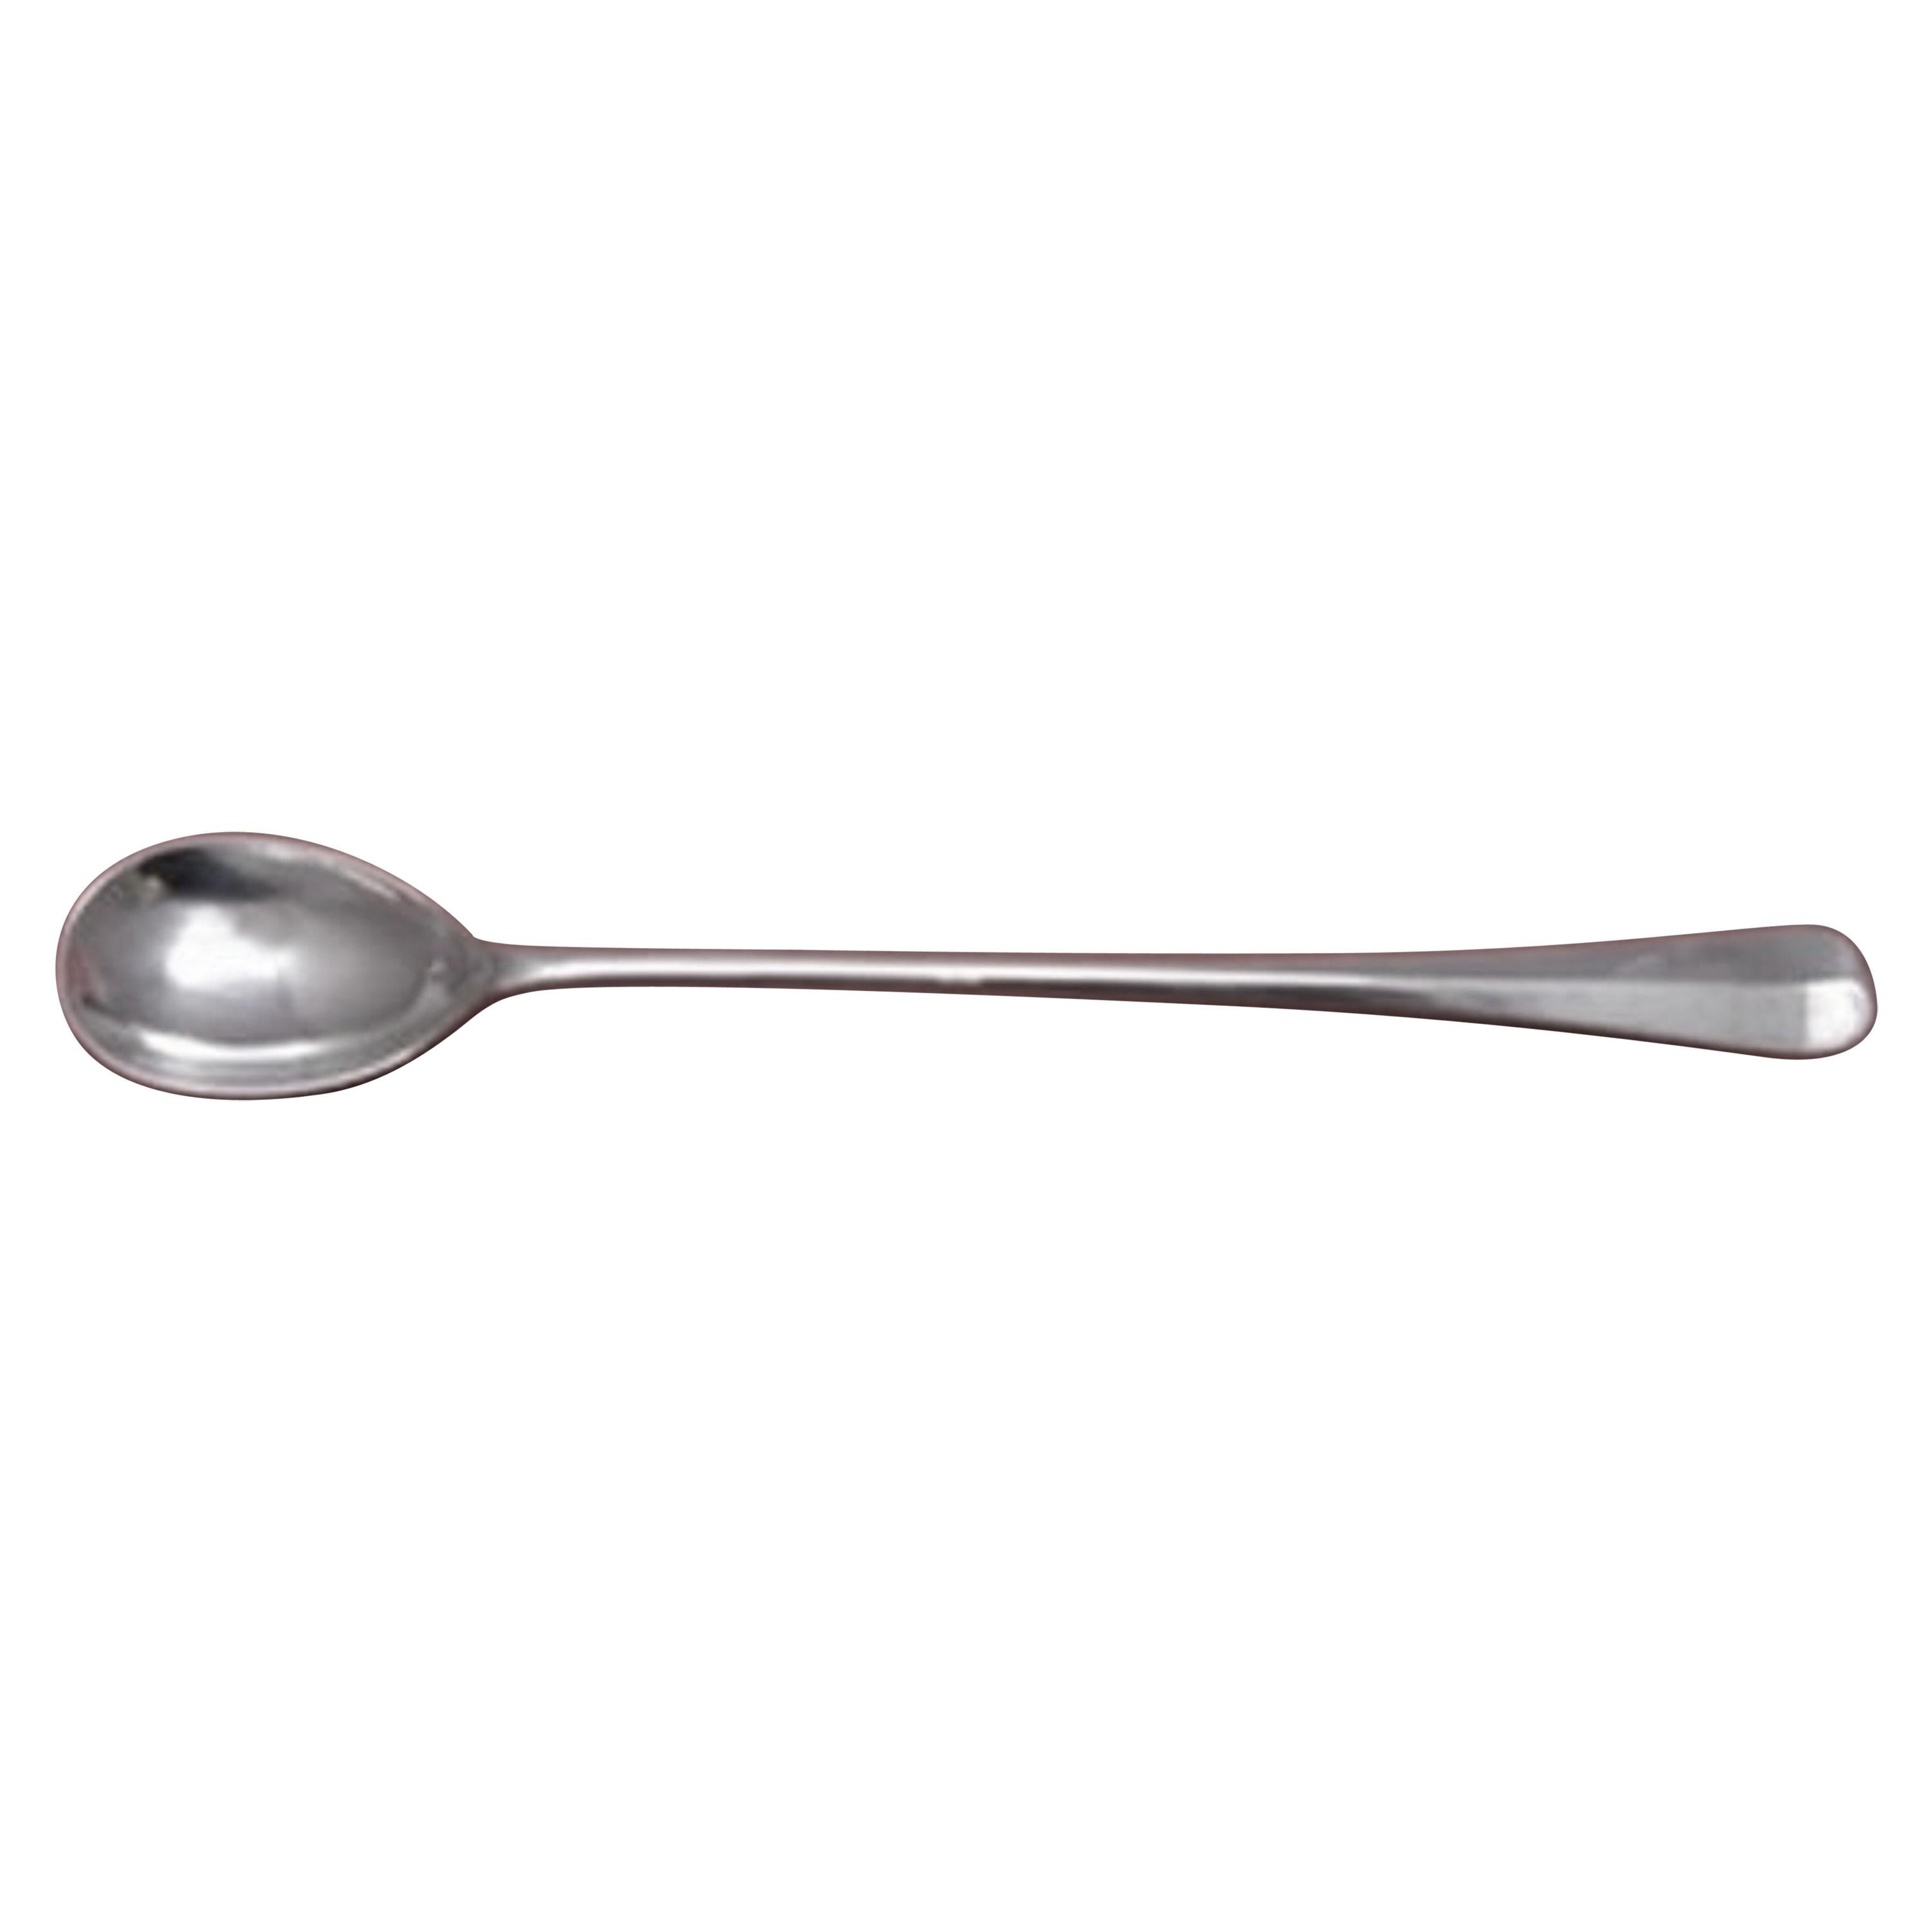 Durgin English Antique or Rattail sterling silver 5 3/4" Teaspoon "H" mono s 